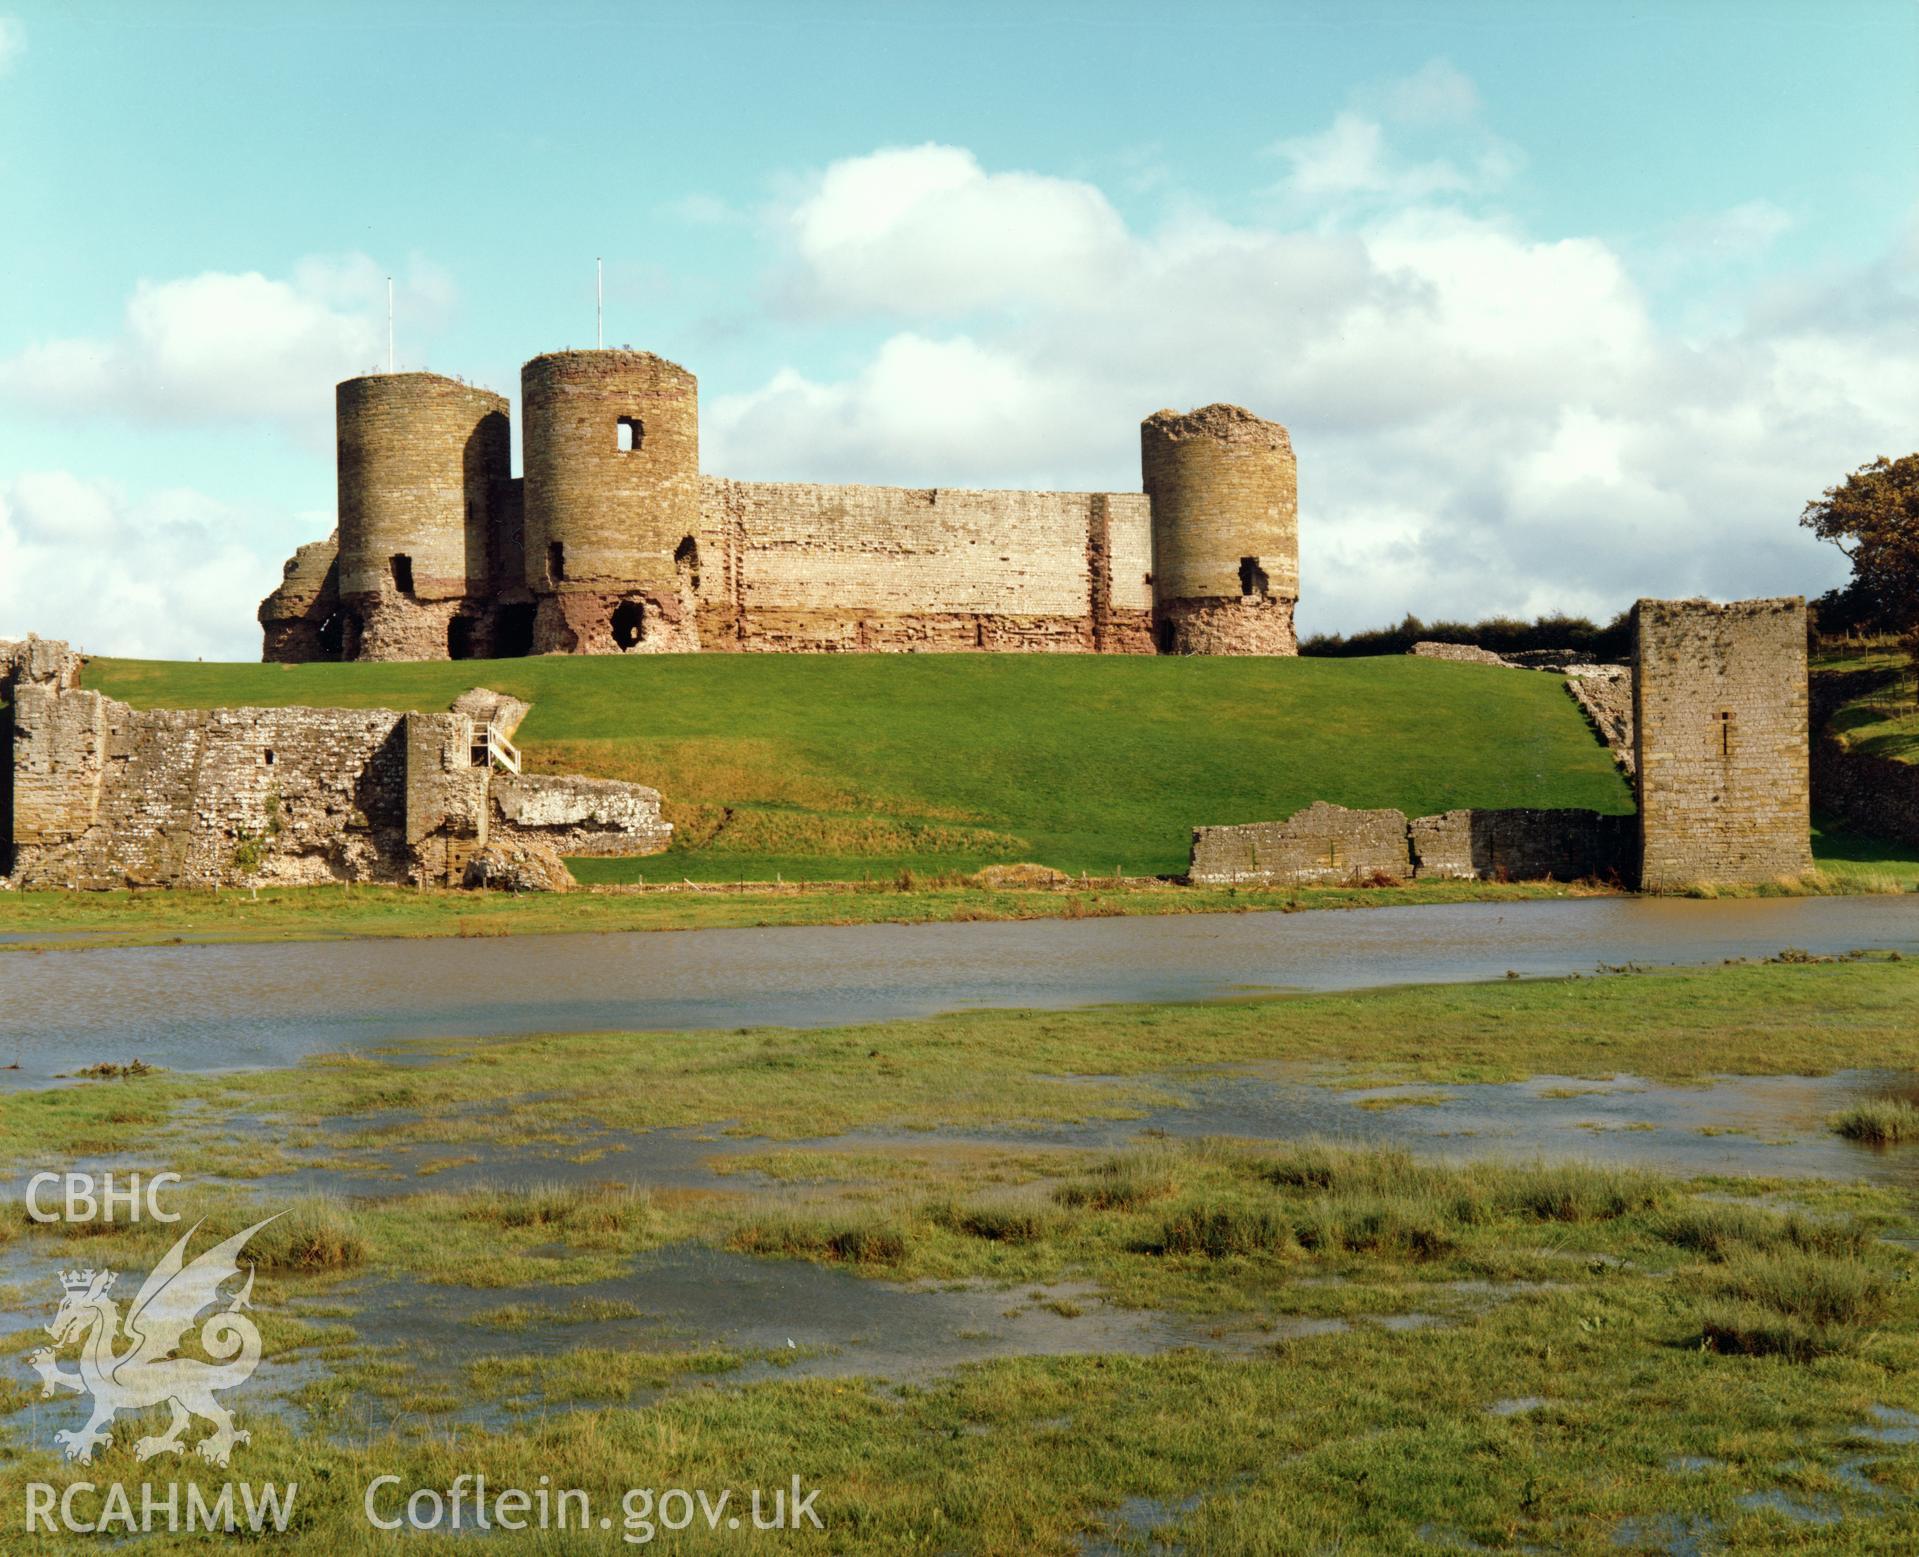 1 colour print showing view of Rhuddlan castle, collated by the former Central Office of Information.